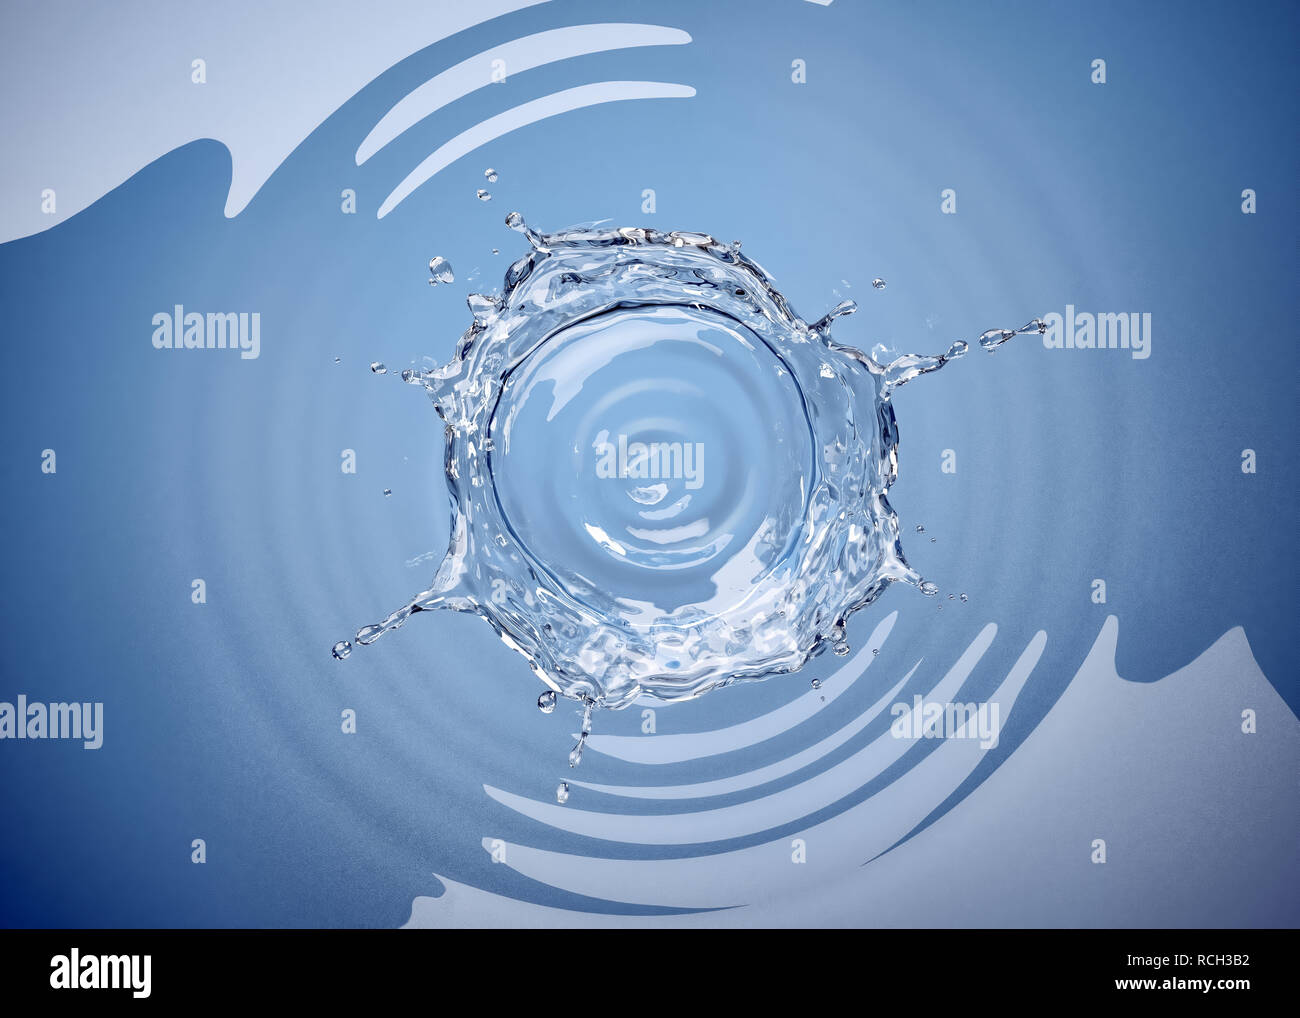 Water crown splash in a water pool, with circular ripples around. Top view. Isolated on white background. Stock Photo